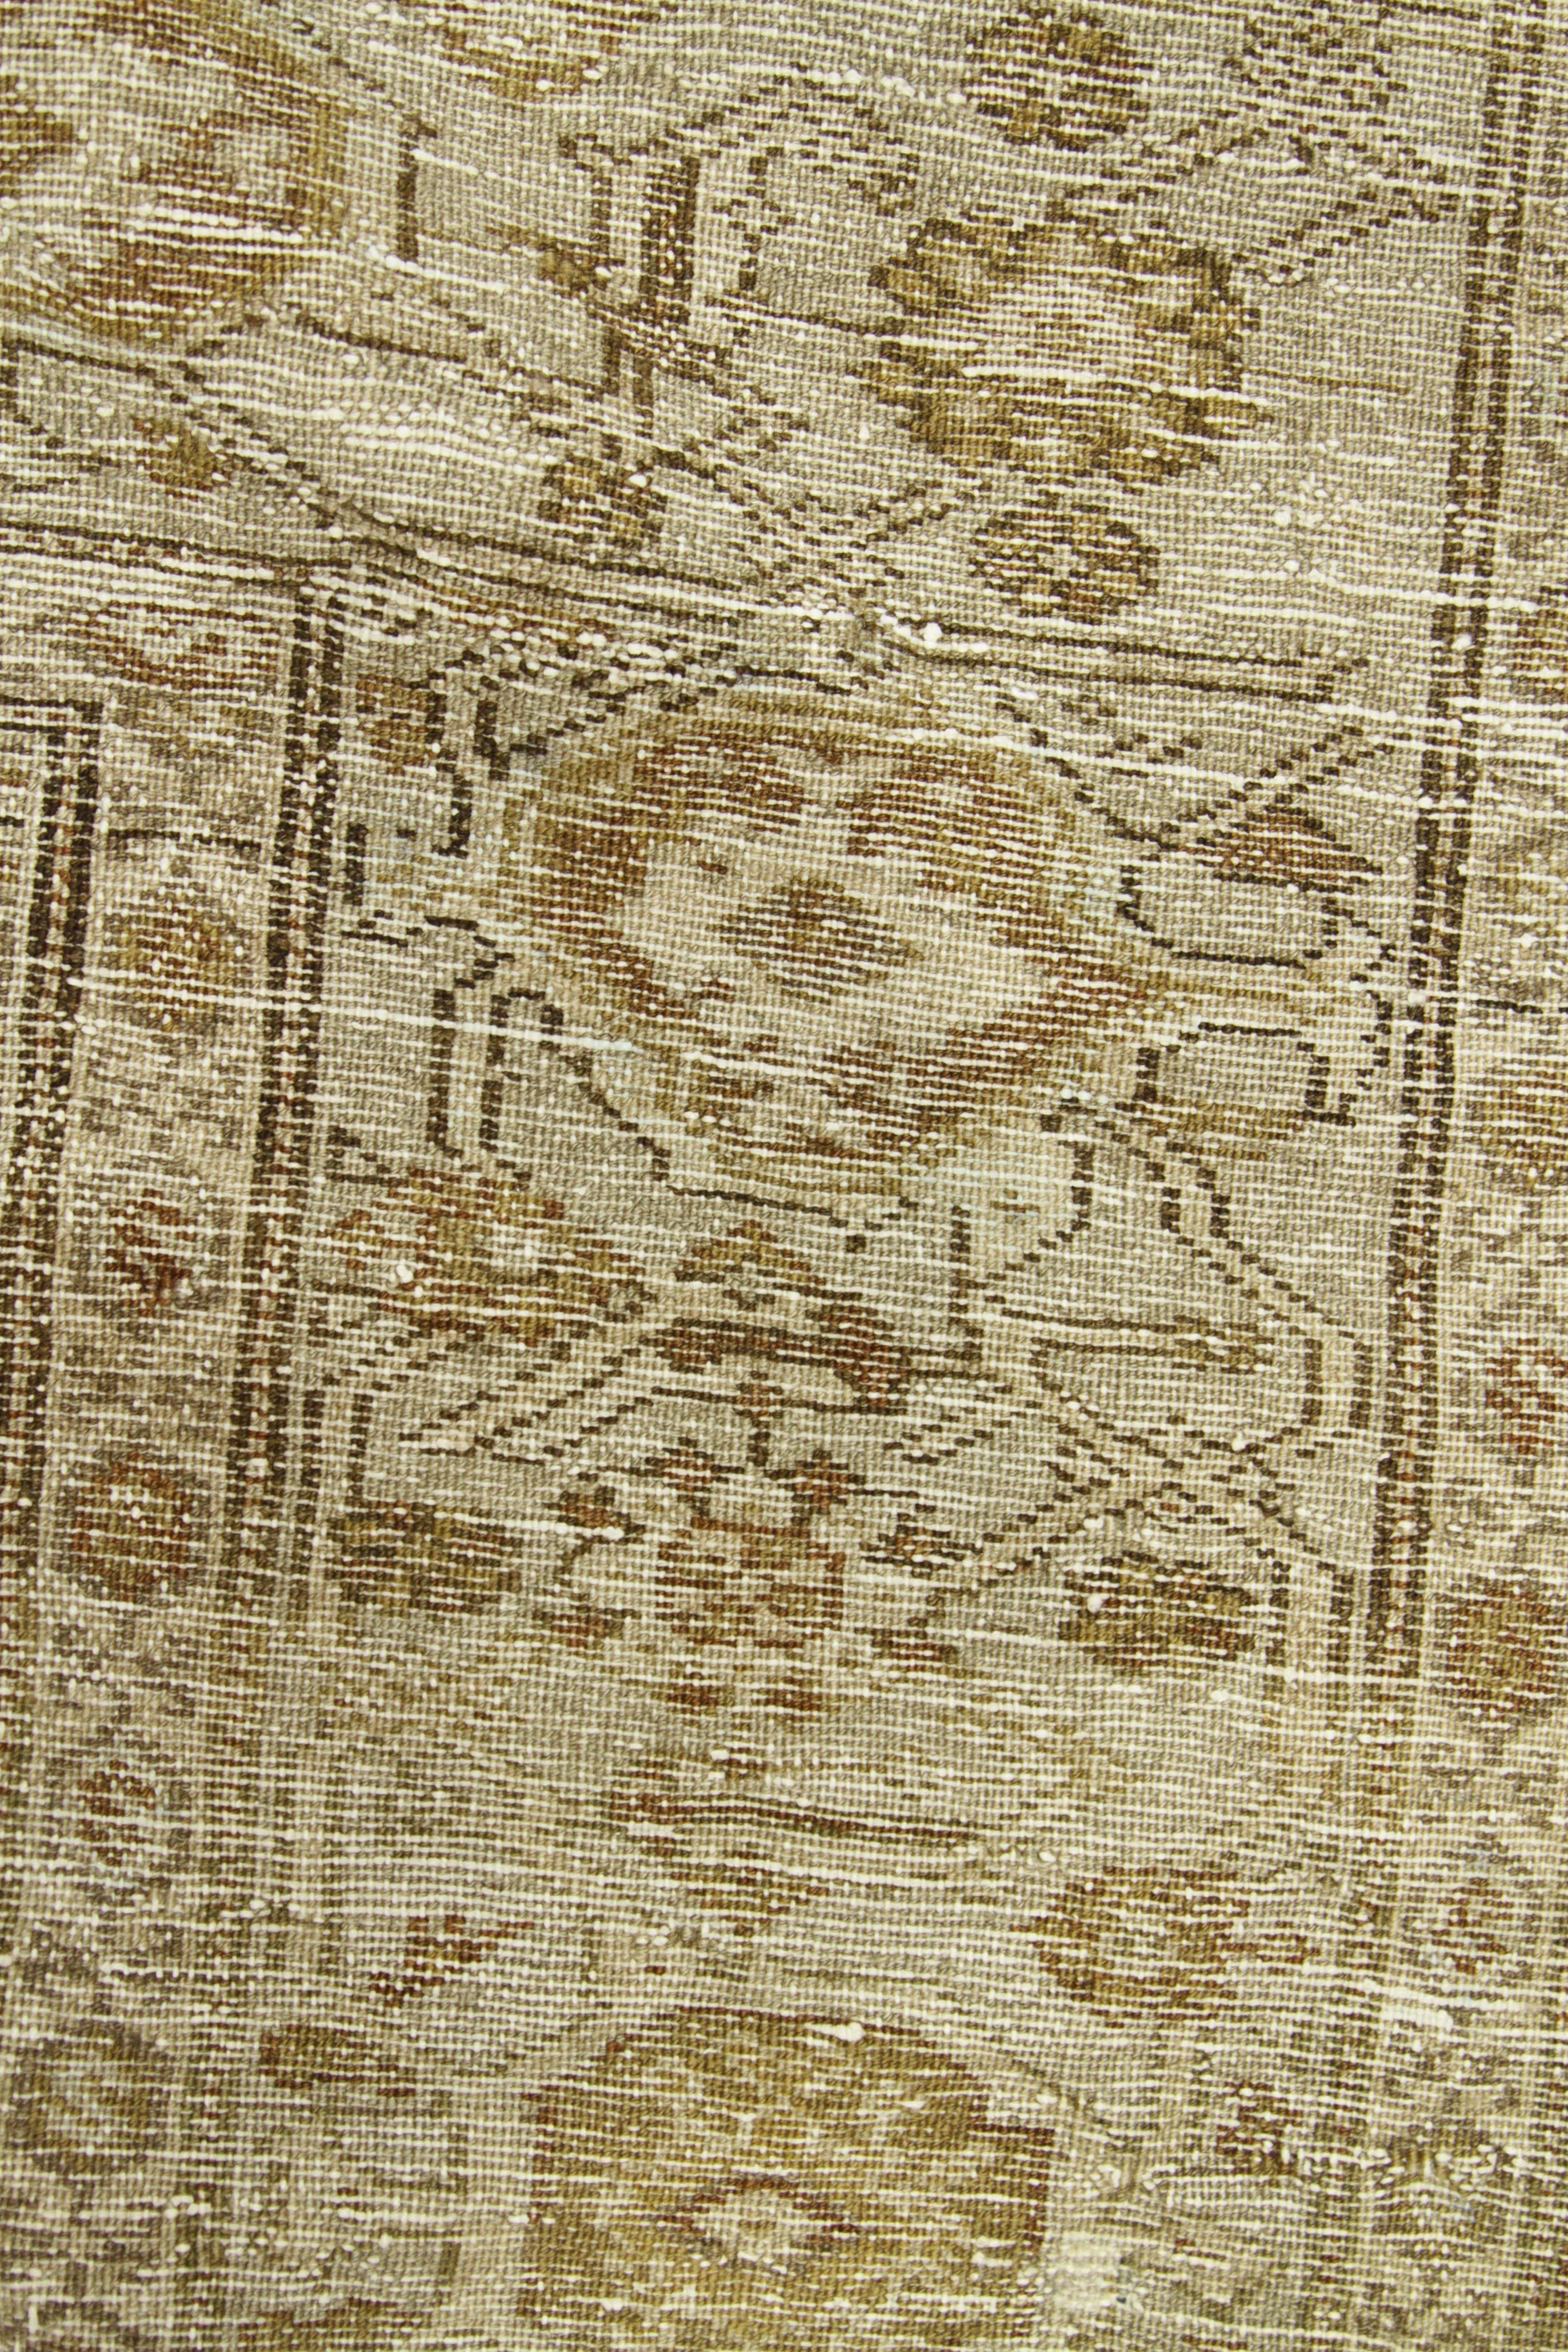 Persian Rug Malayer Design with Fading Rustic Floral Patterns, circa 1940 In Excellent Condition For Sale In Dallas, TX